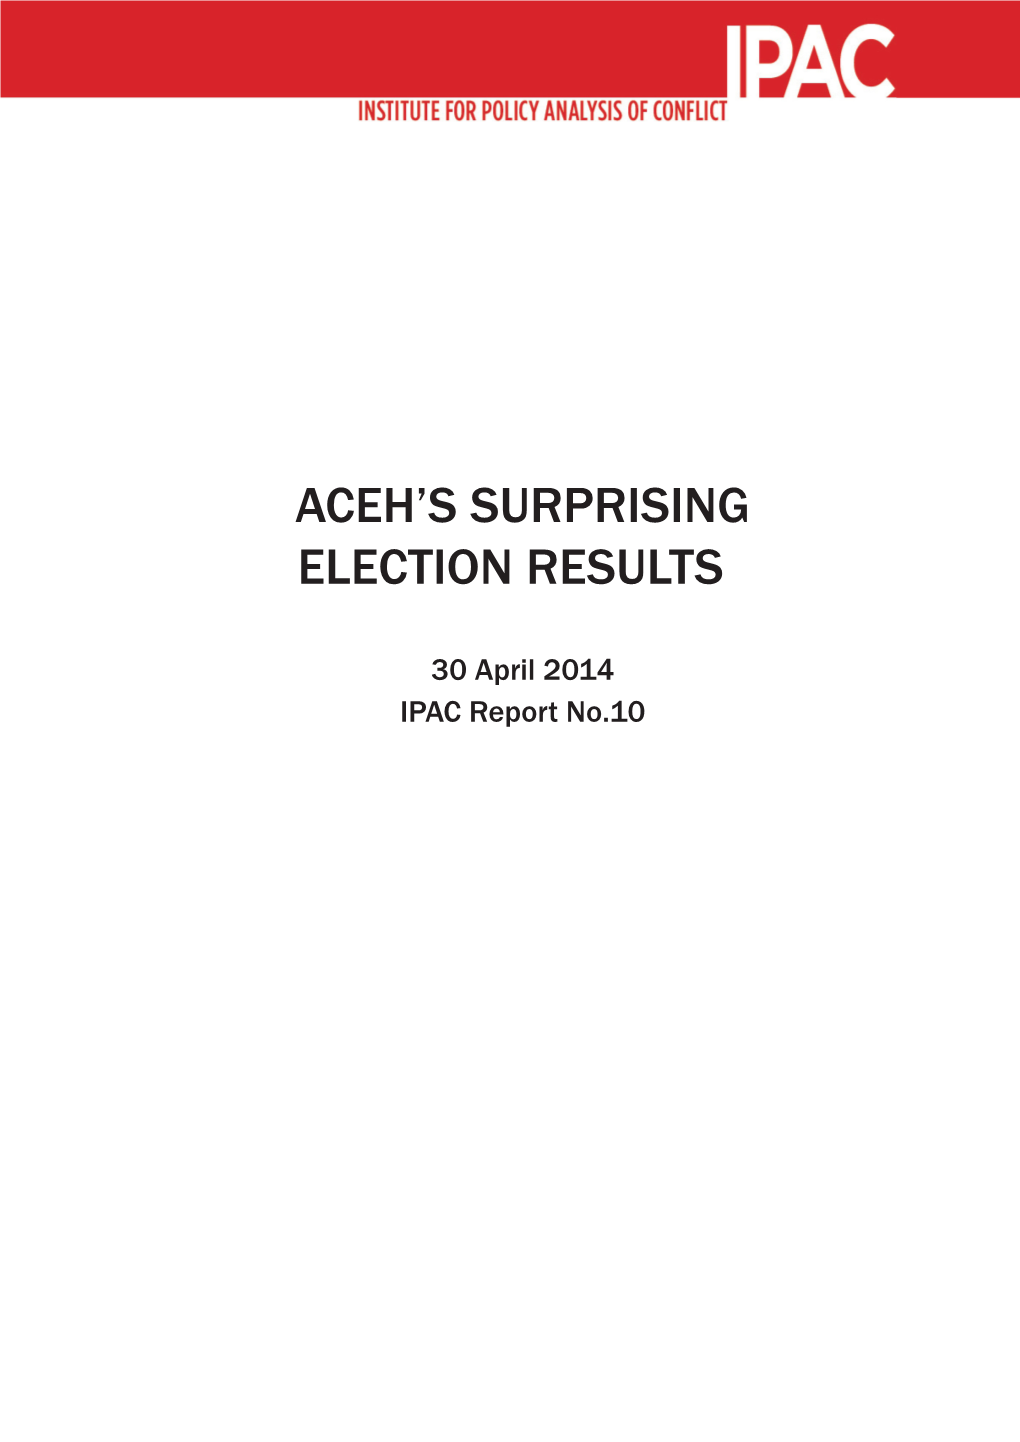 Aceh's Surprising Election Results